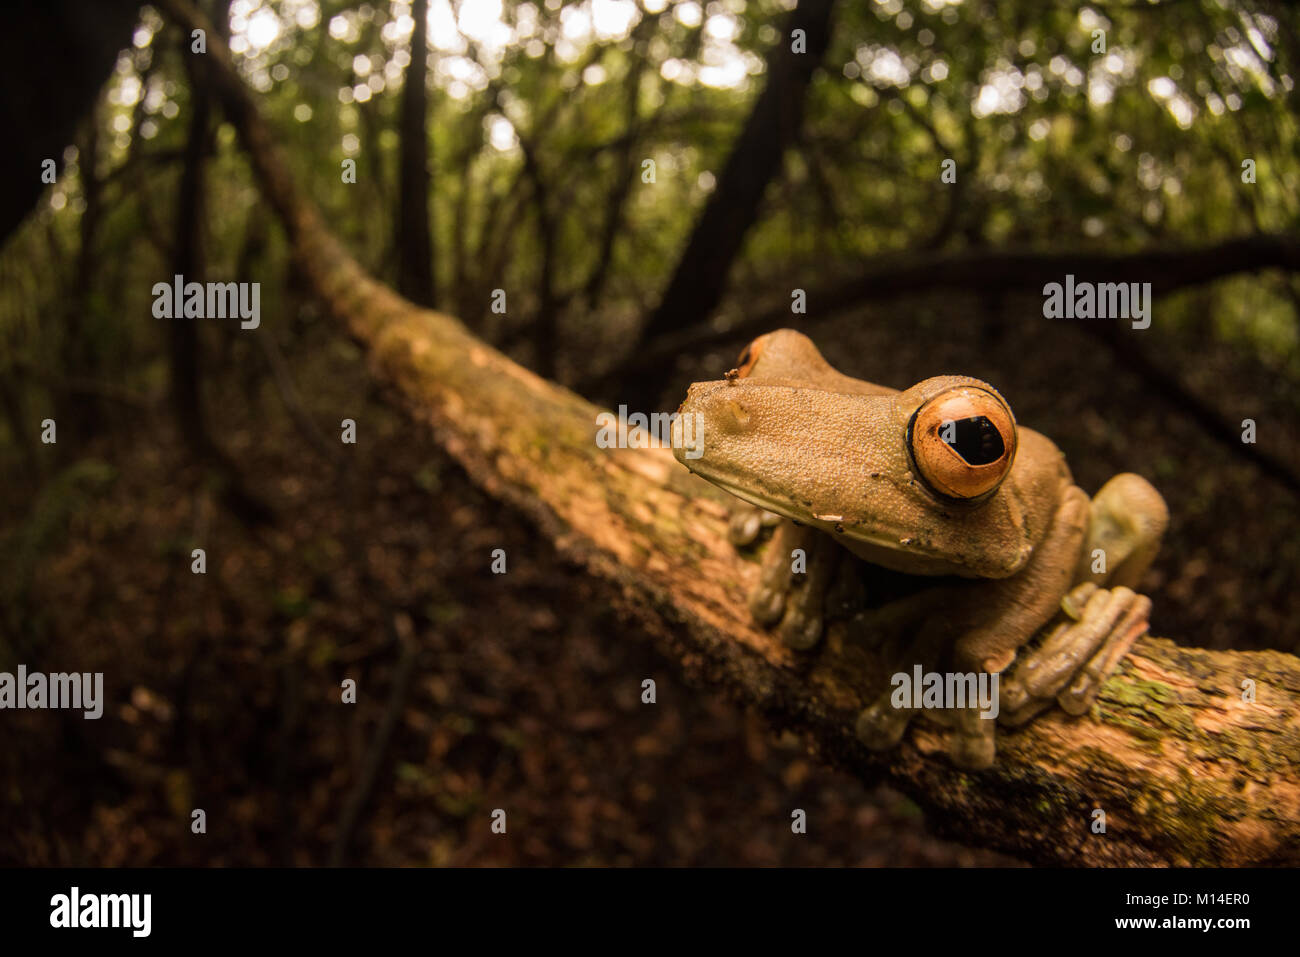 A large tree frog (Hypsiboas boans) from the Amazon jungle, Stock Photo